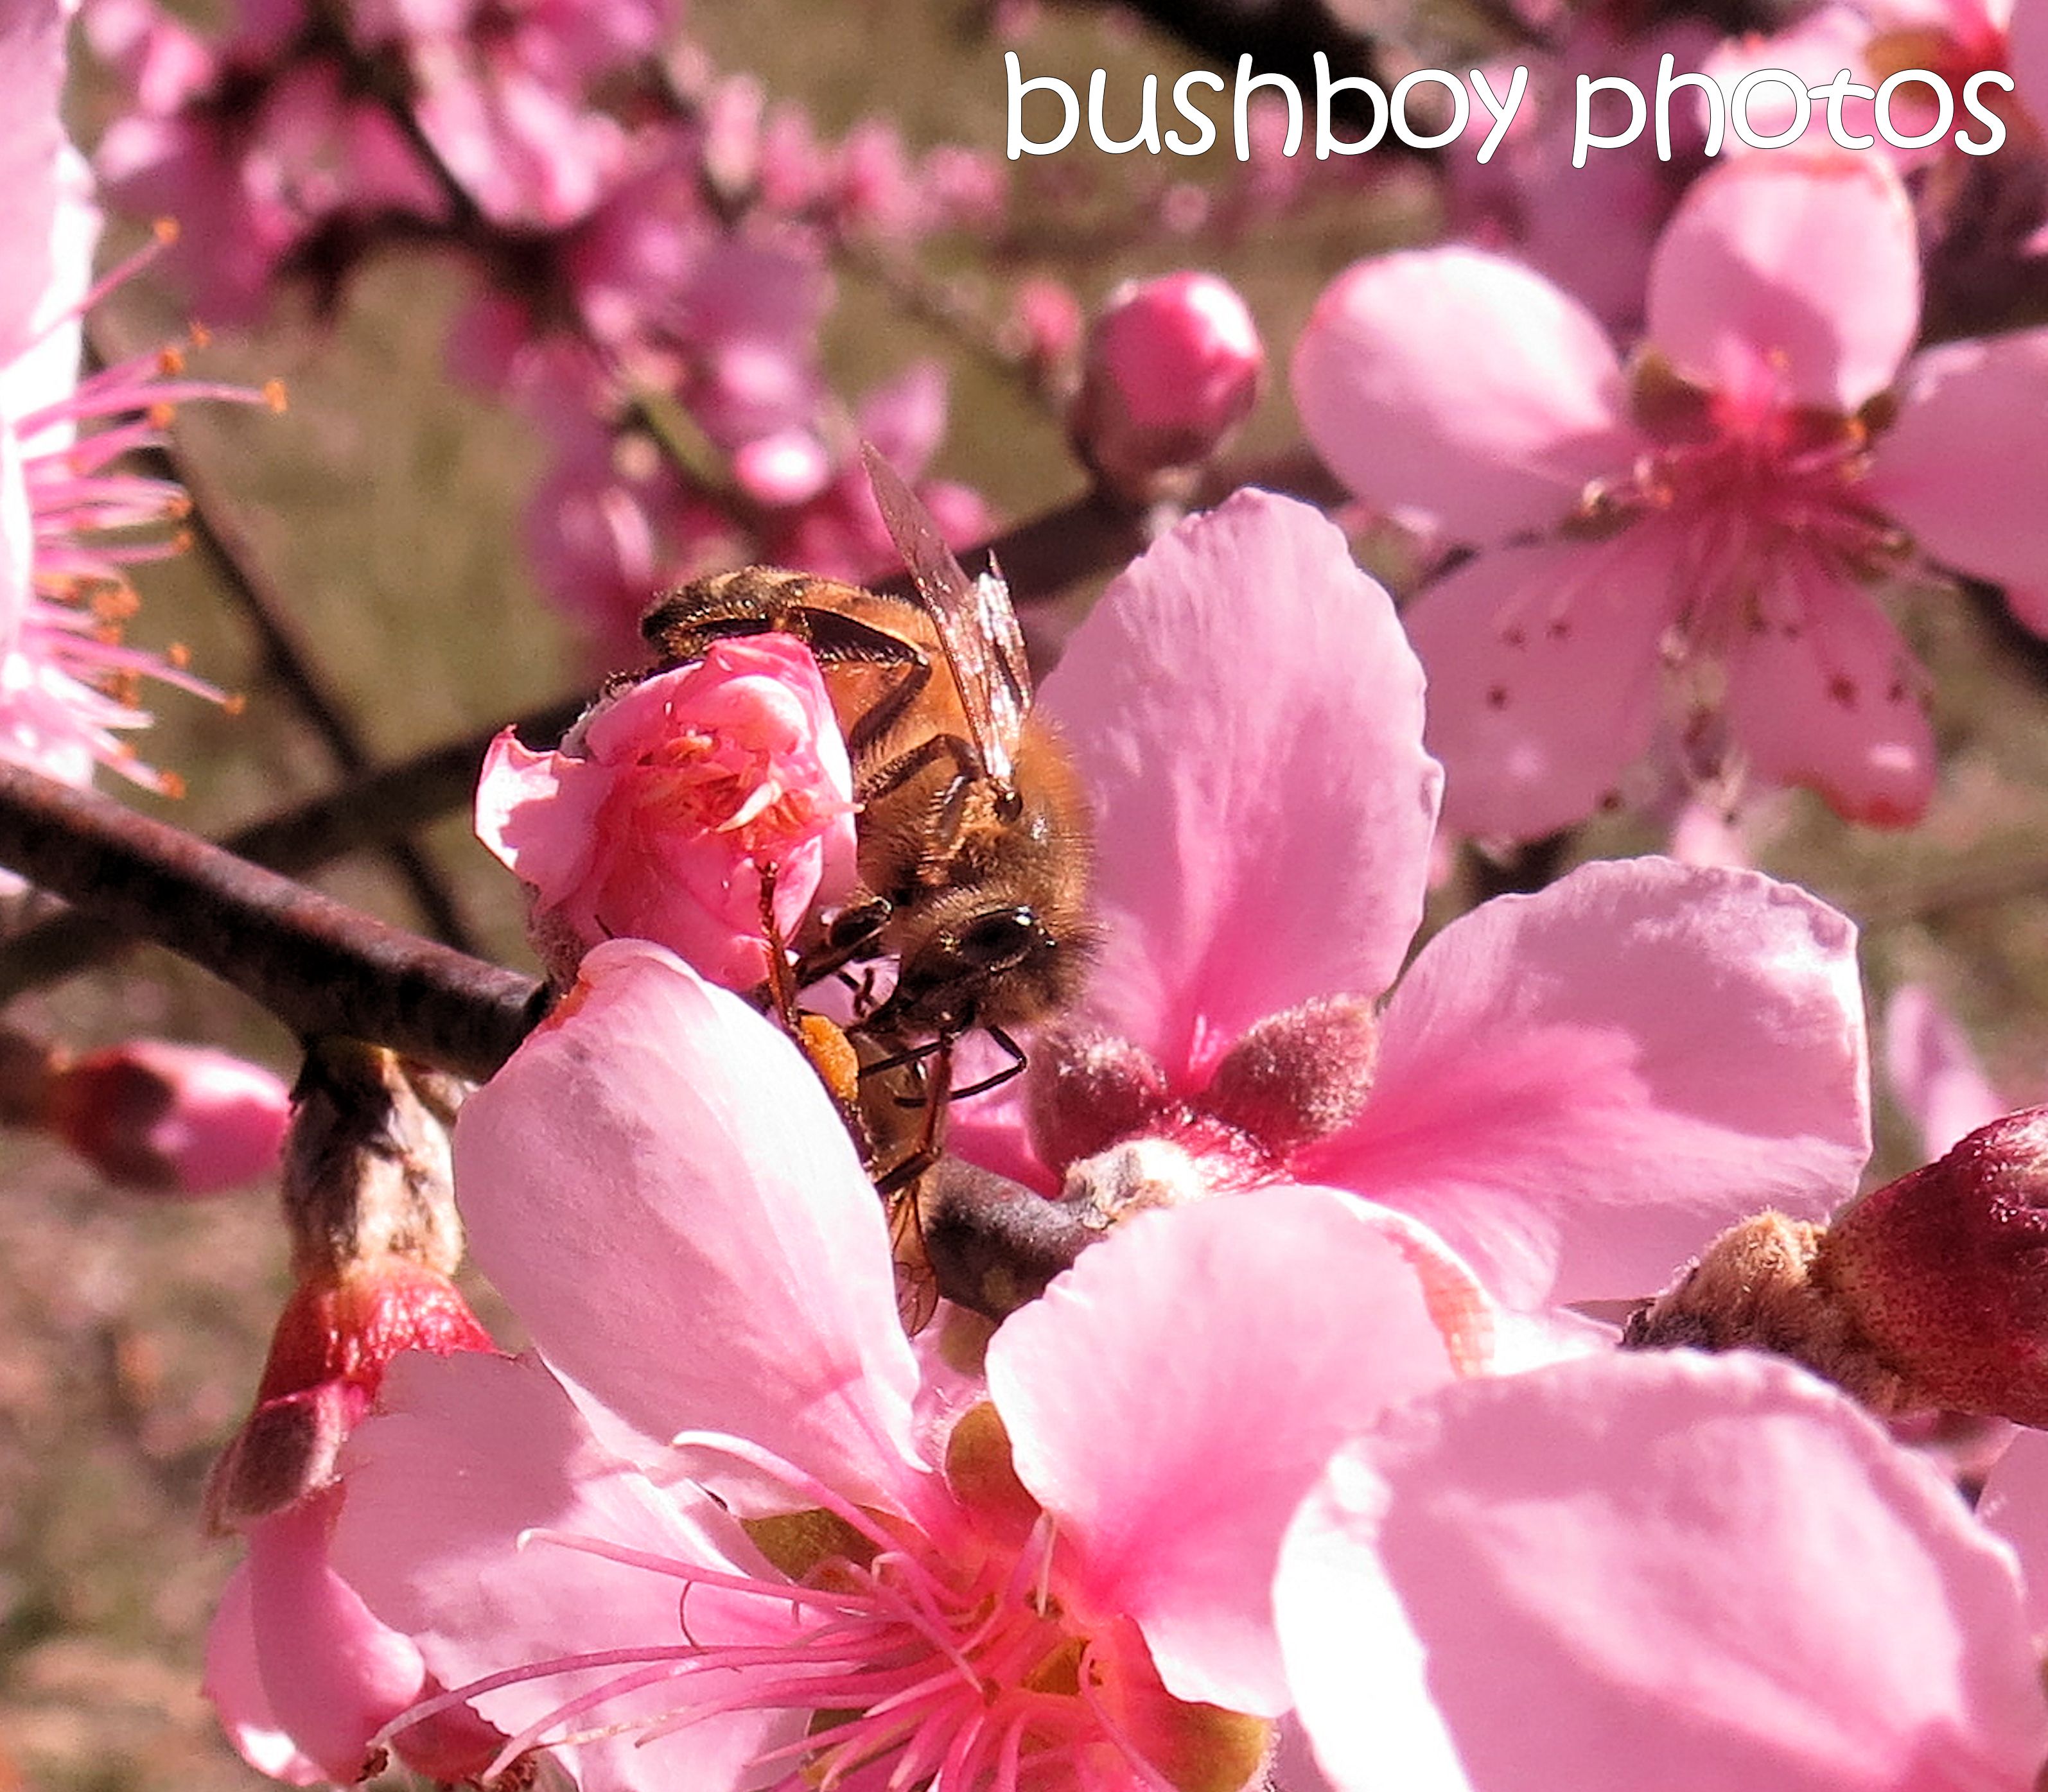 bee_nectarine blossoms_named_home_july 2016